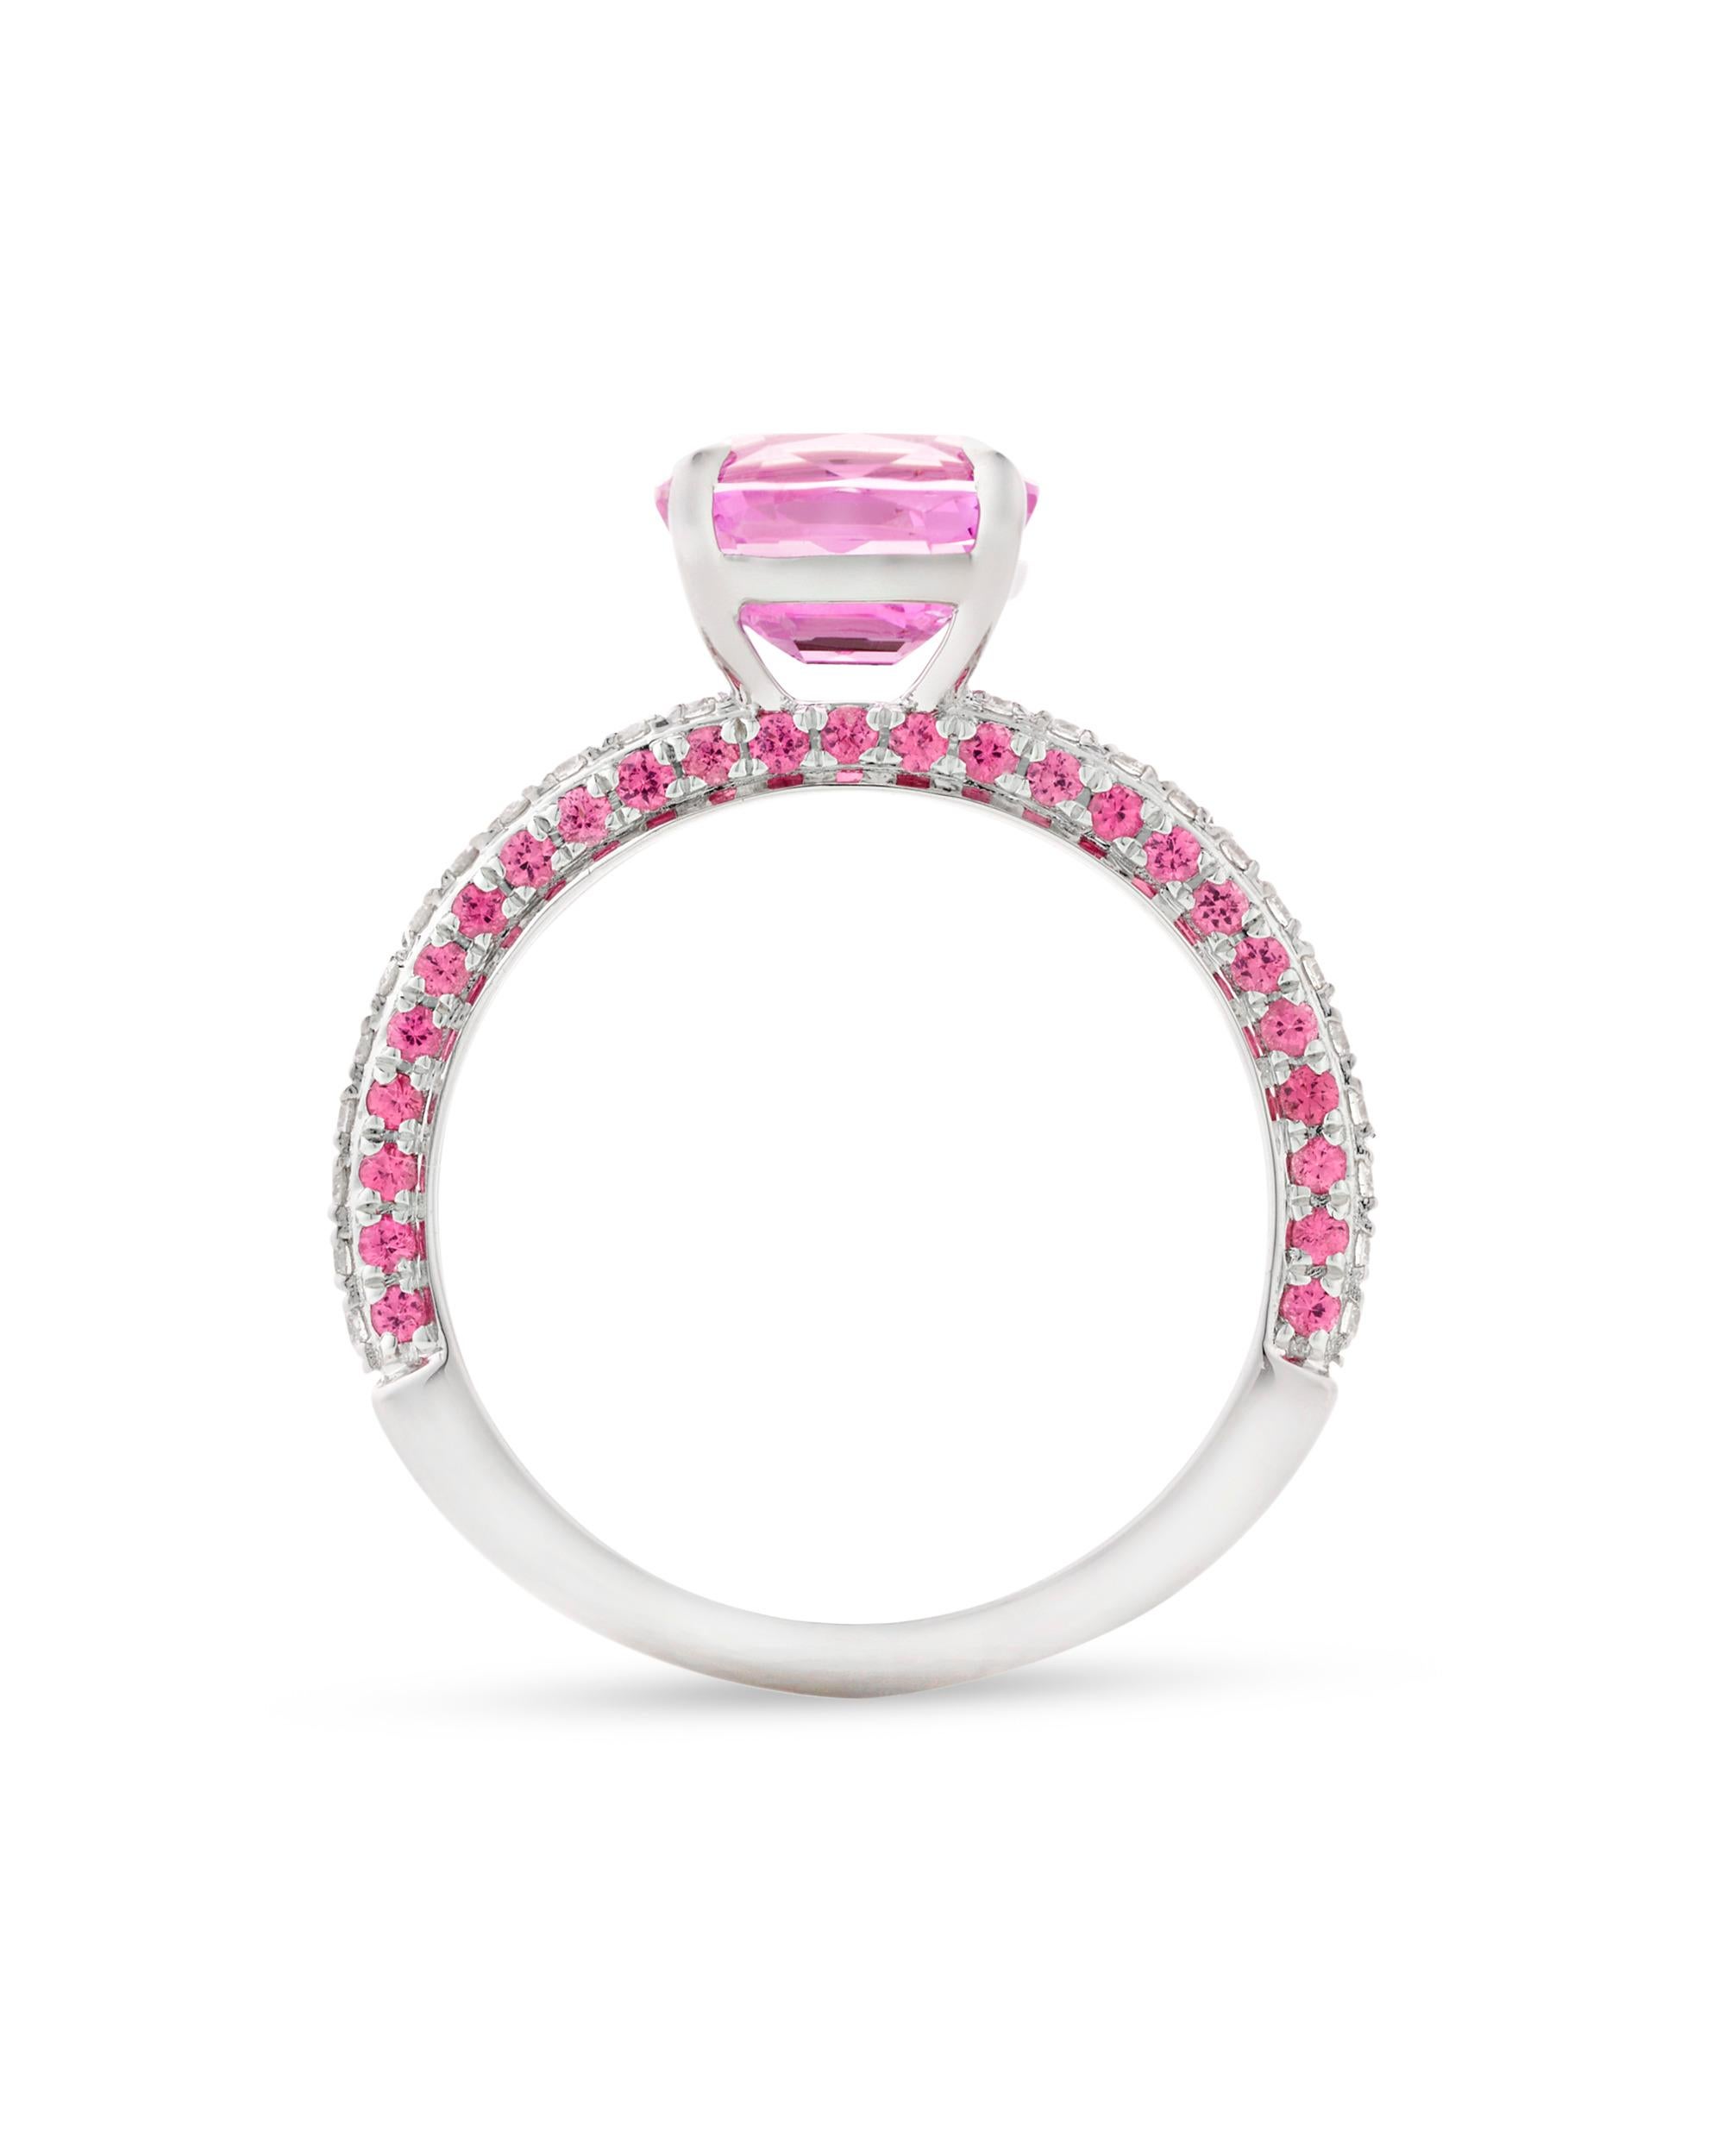 Modern Untreated Pink Sapphire Ring, 2.19 Carats